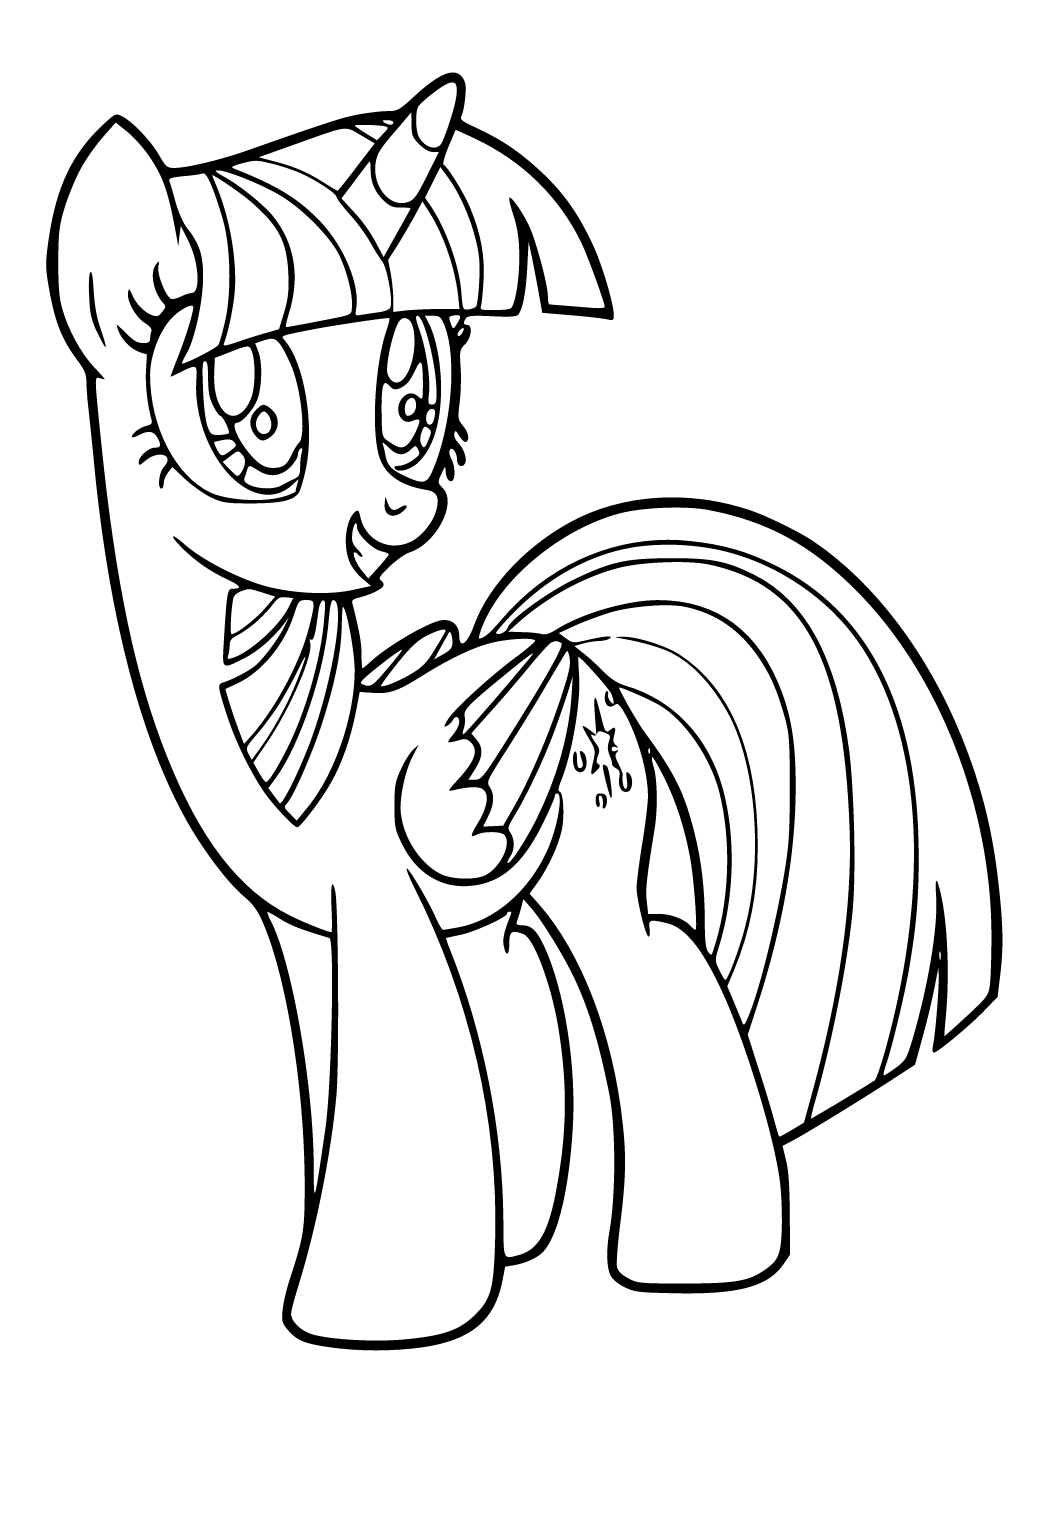 Free printable twilight sparkle d coloring page sheet and picture for adults and kids girls and boys